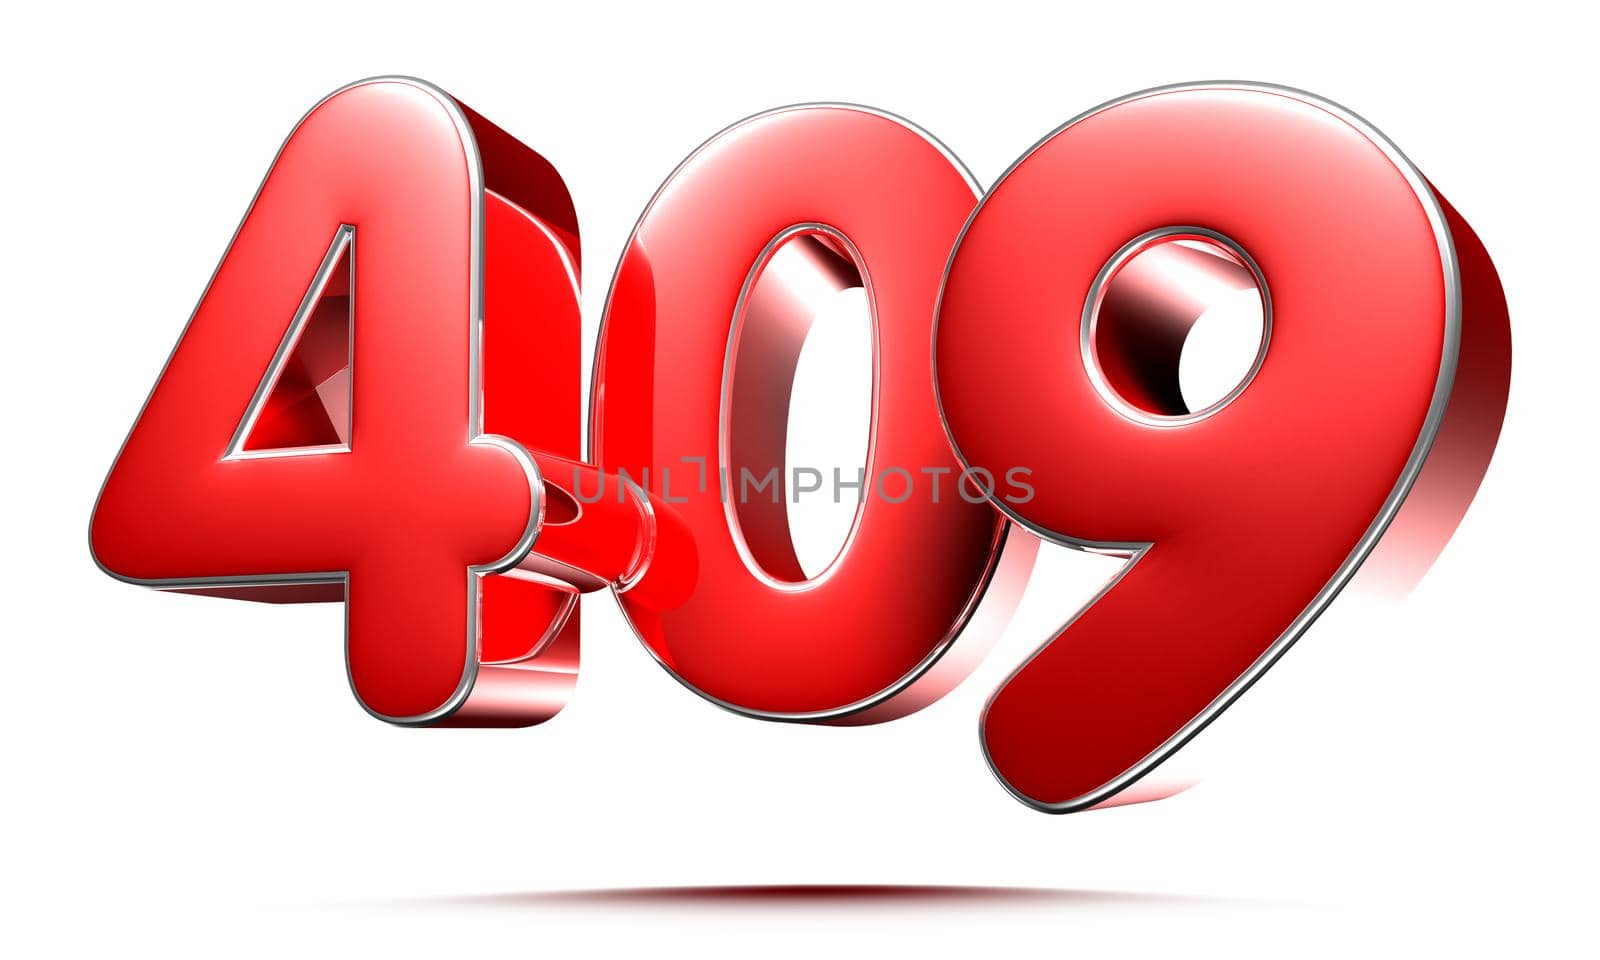 Rounded red numbers 409 on white background 3D illustration with clipping path by thitimontoyai